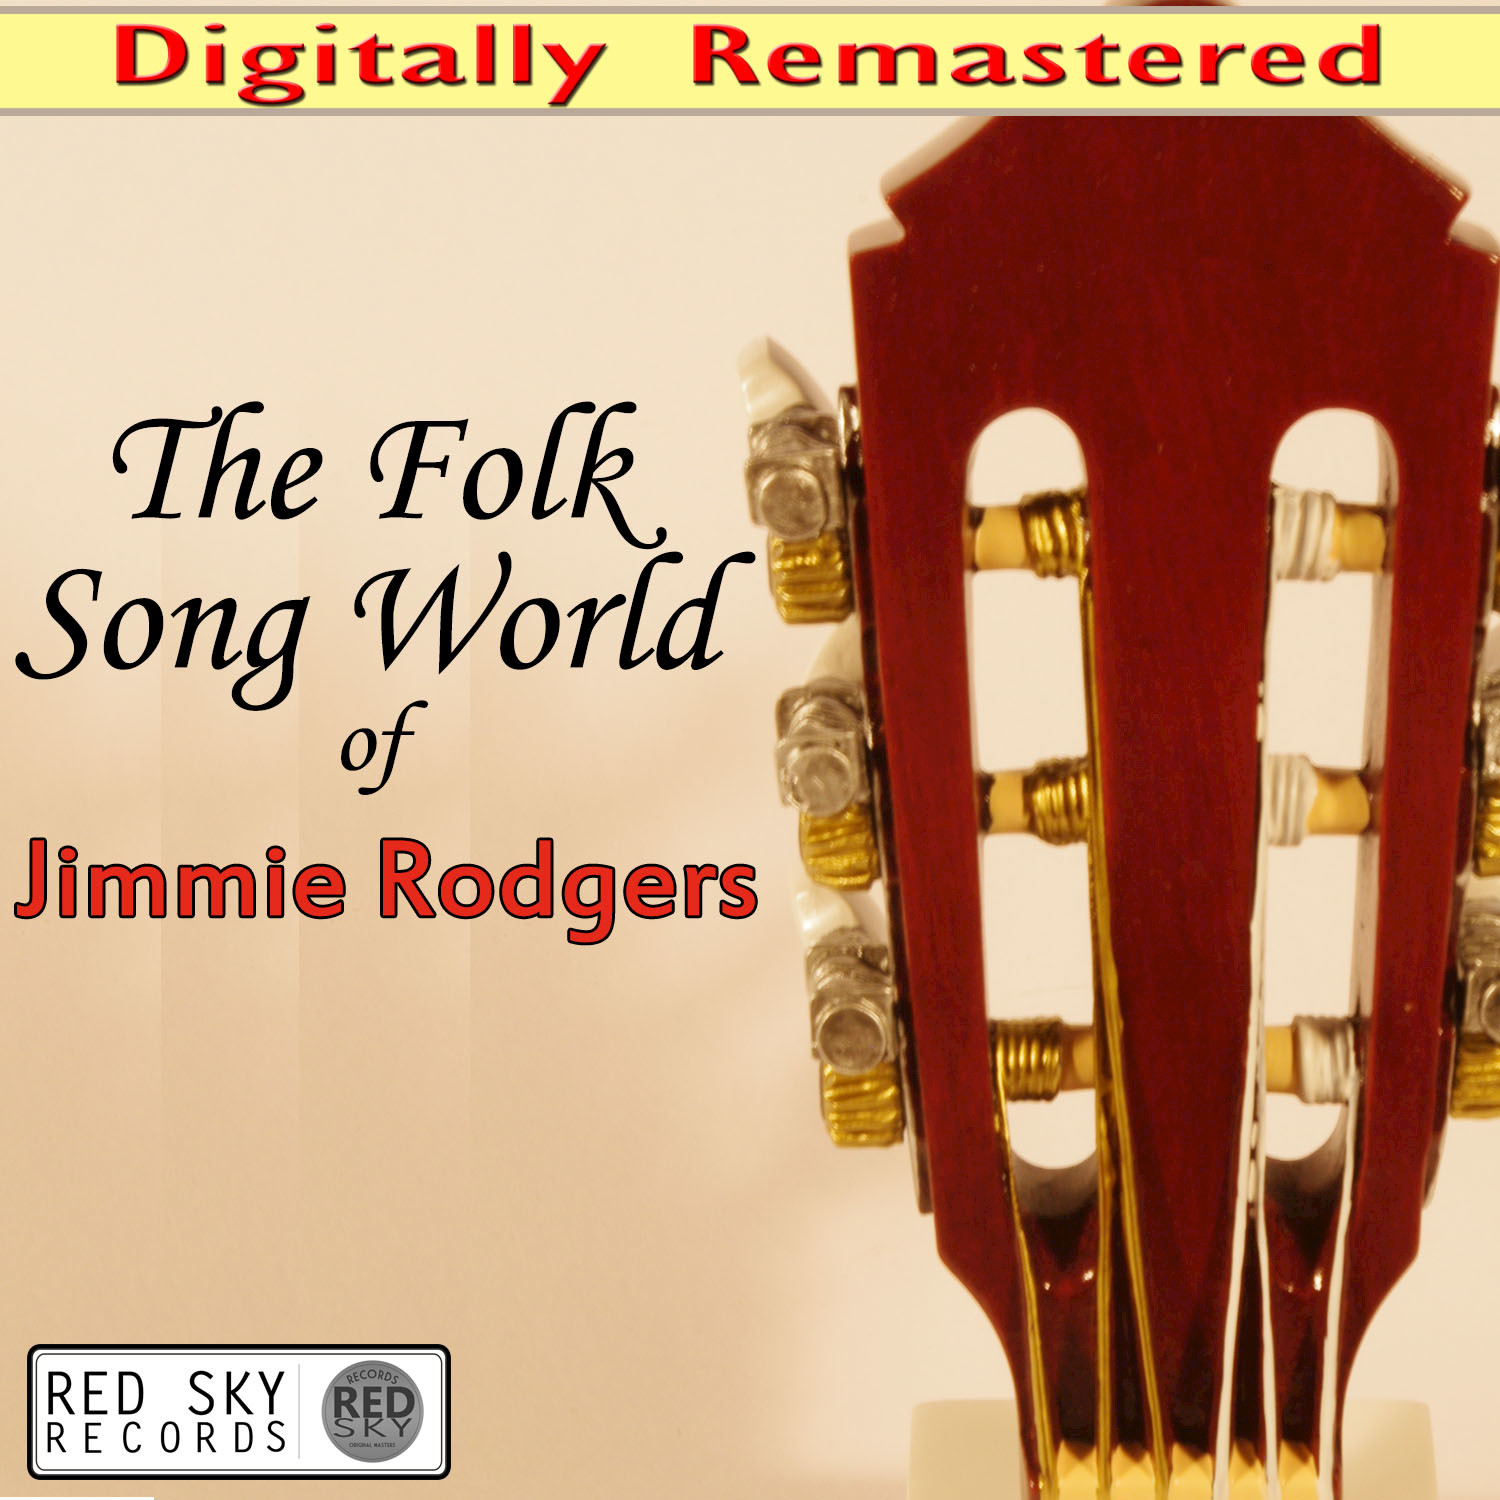 The Folk Song World of Jimmie Rodgers (Digitally Remastered)